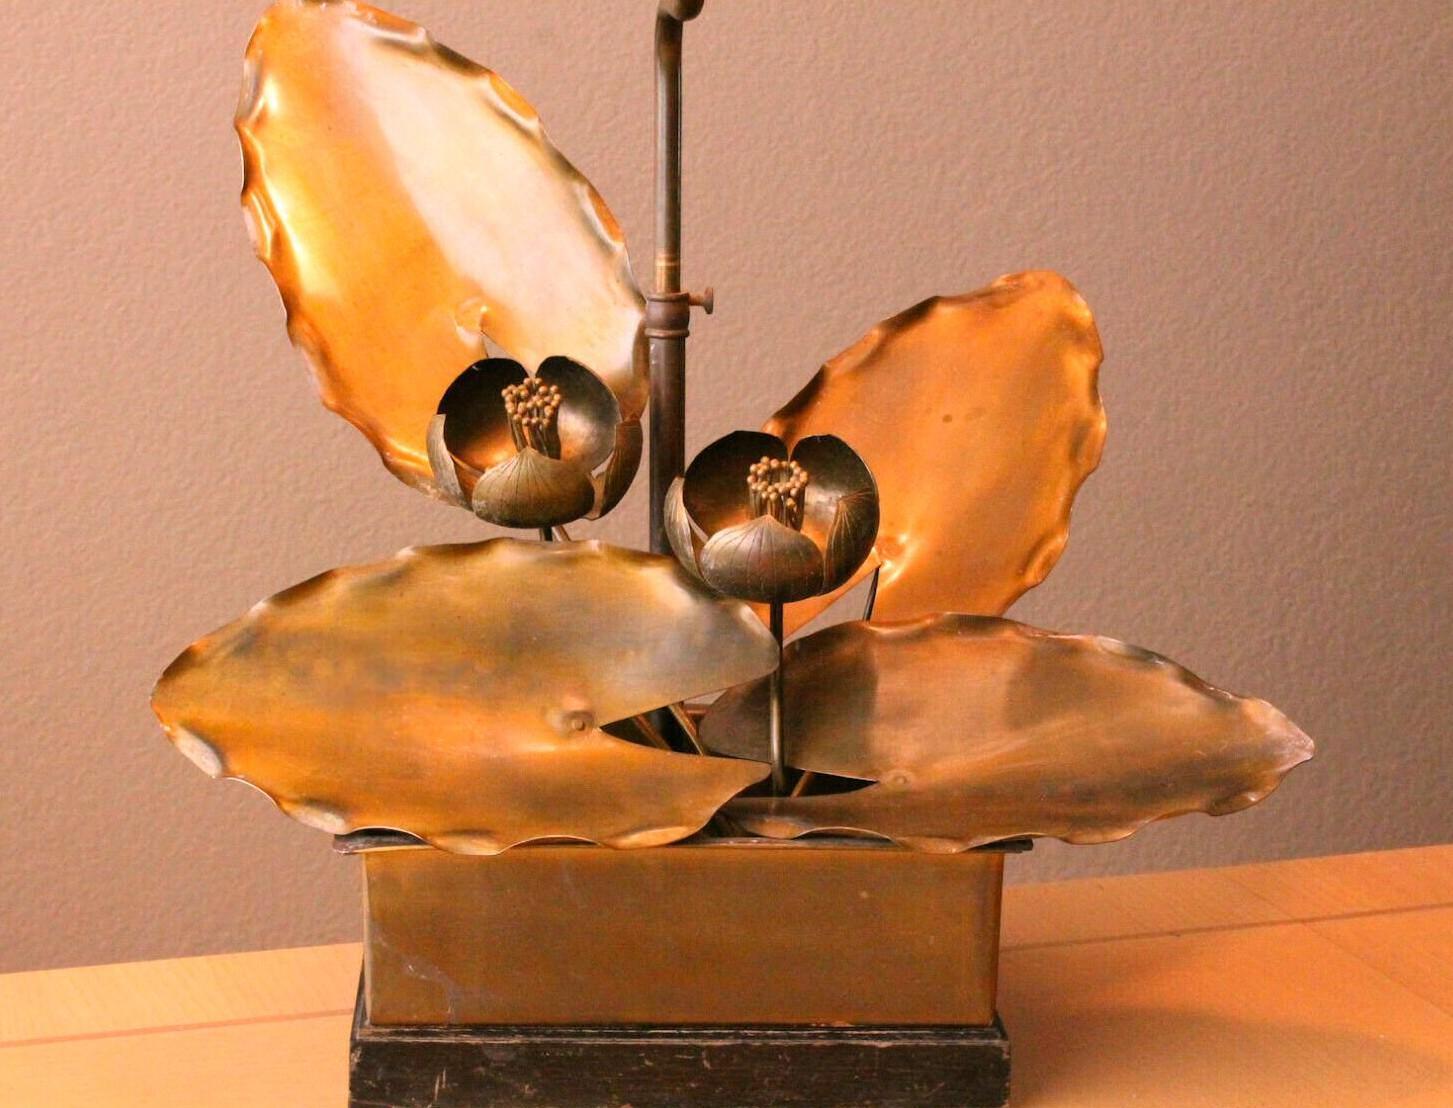 Hand-Crafted Magificent 1920s Art Nouveau Metal Sculptural Lotus Lamp. Camed Art Glass For Sale